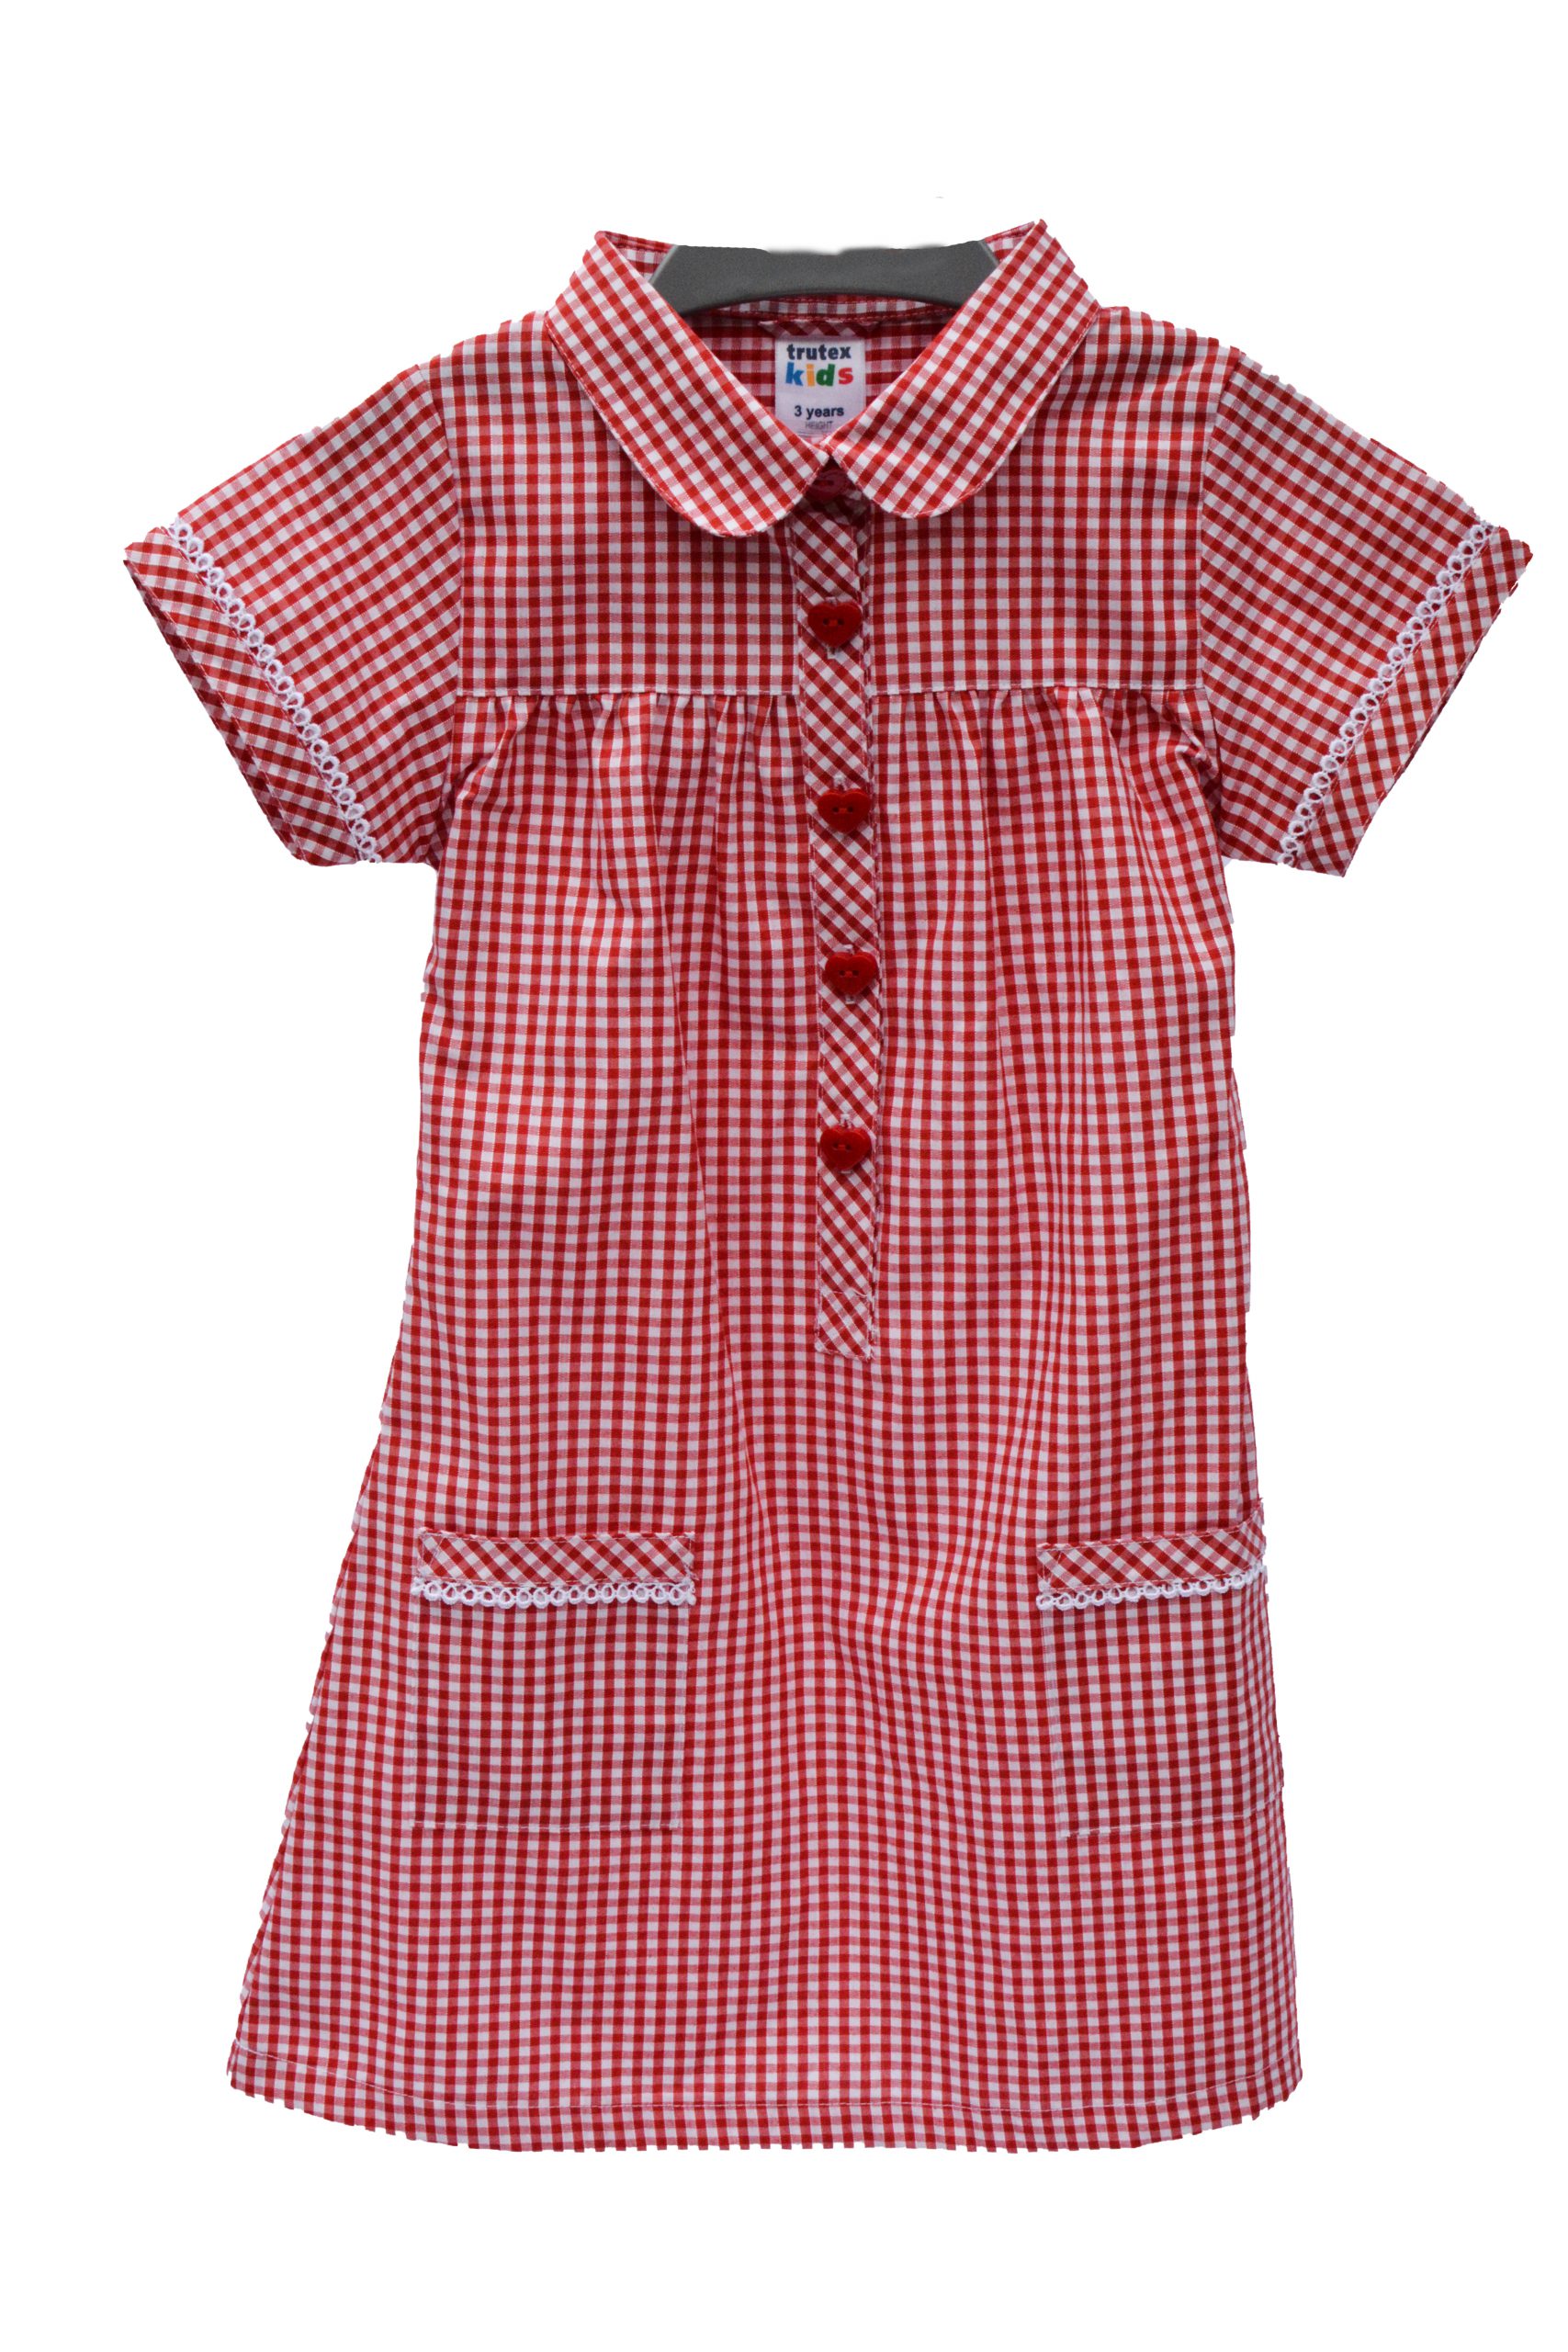 GINGHAM BUTTON DRESS - Cain of Heswall